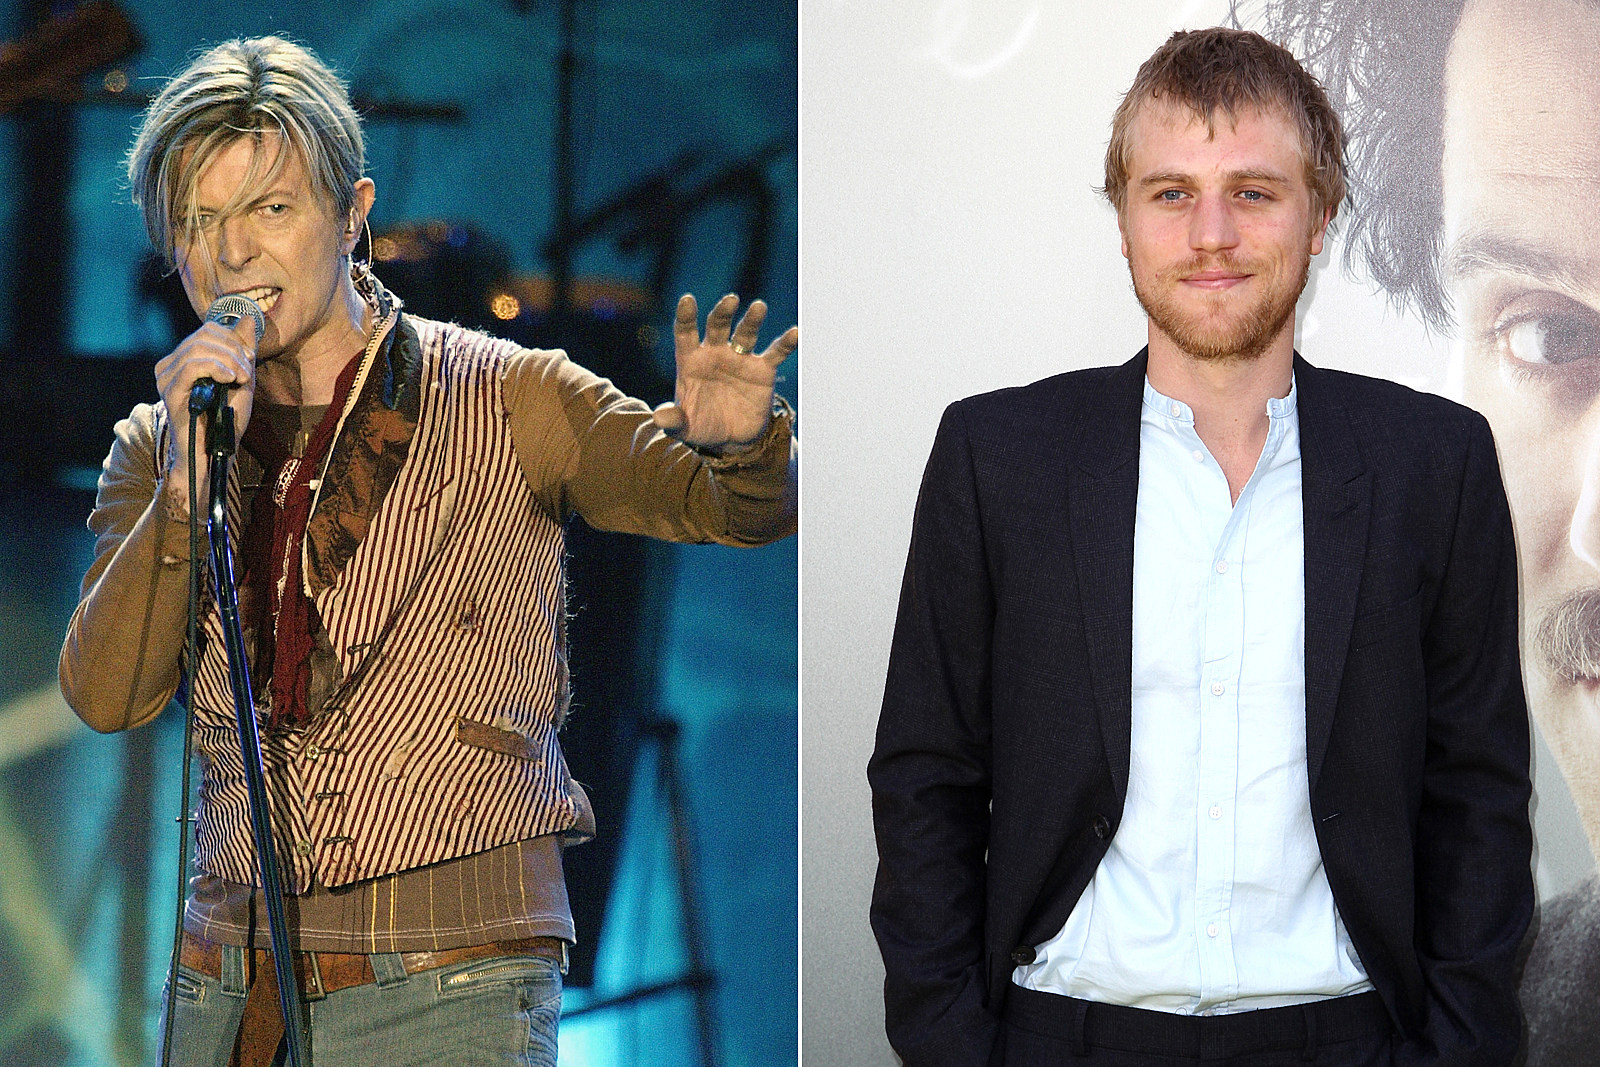 Get Your First Look At Johnny Flynn As David Bowie In Stardust